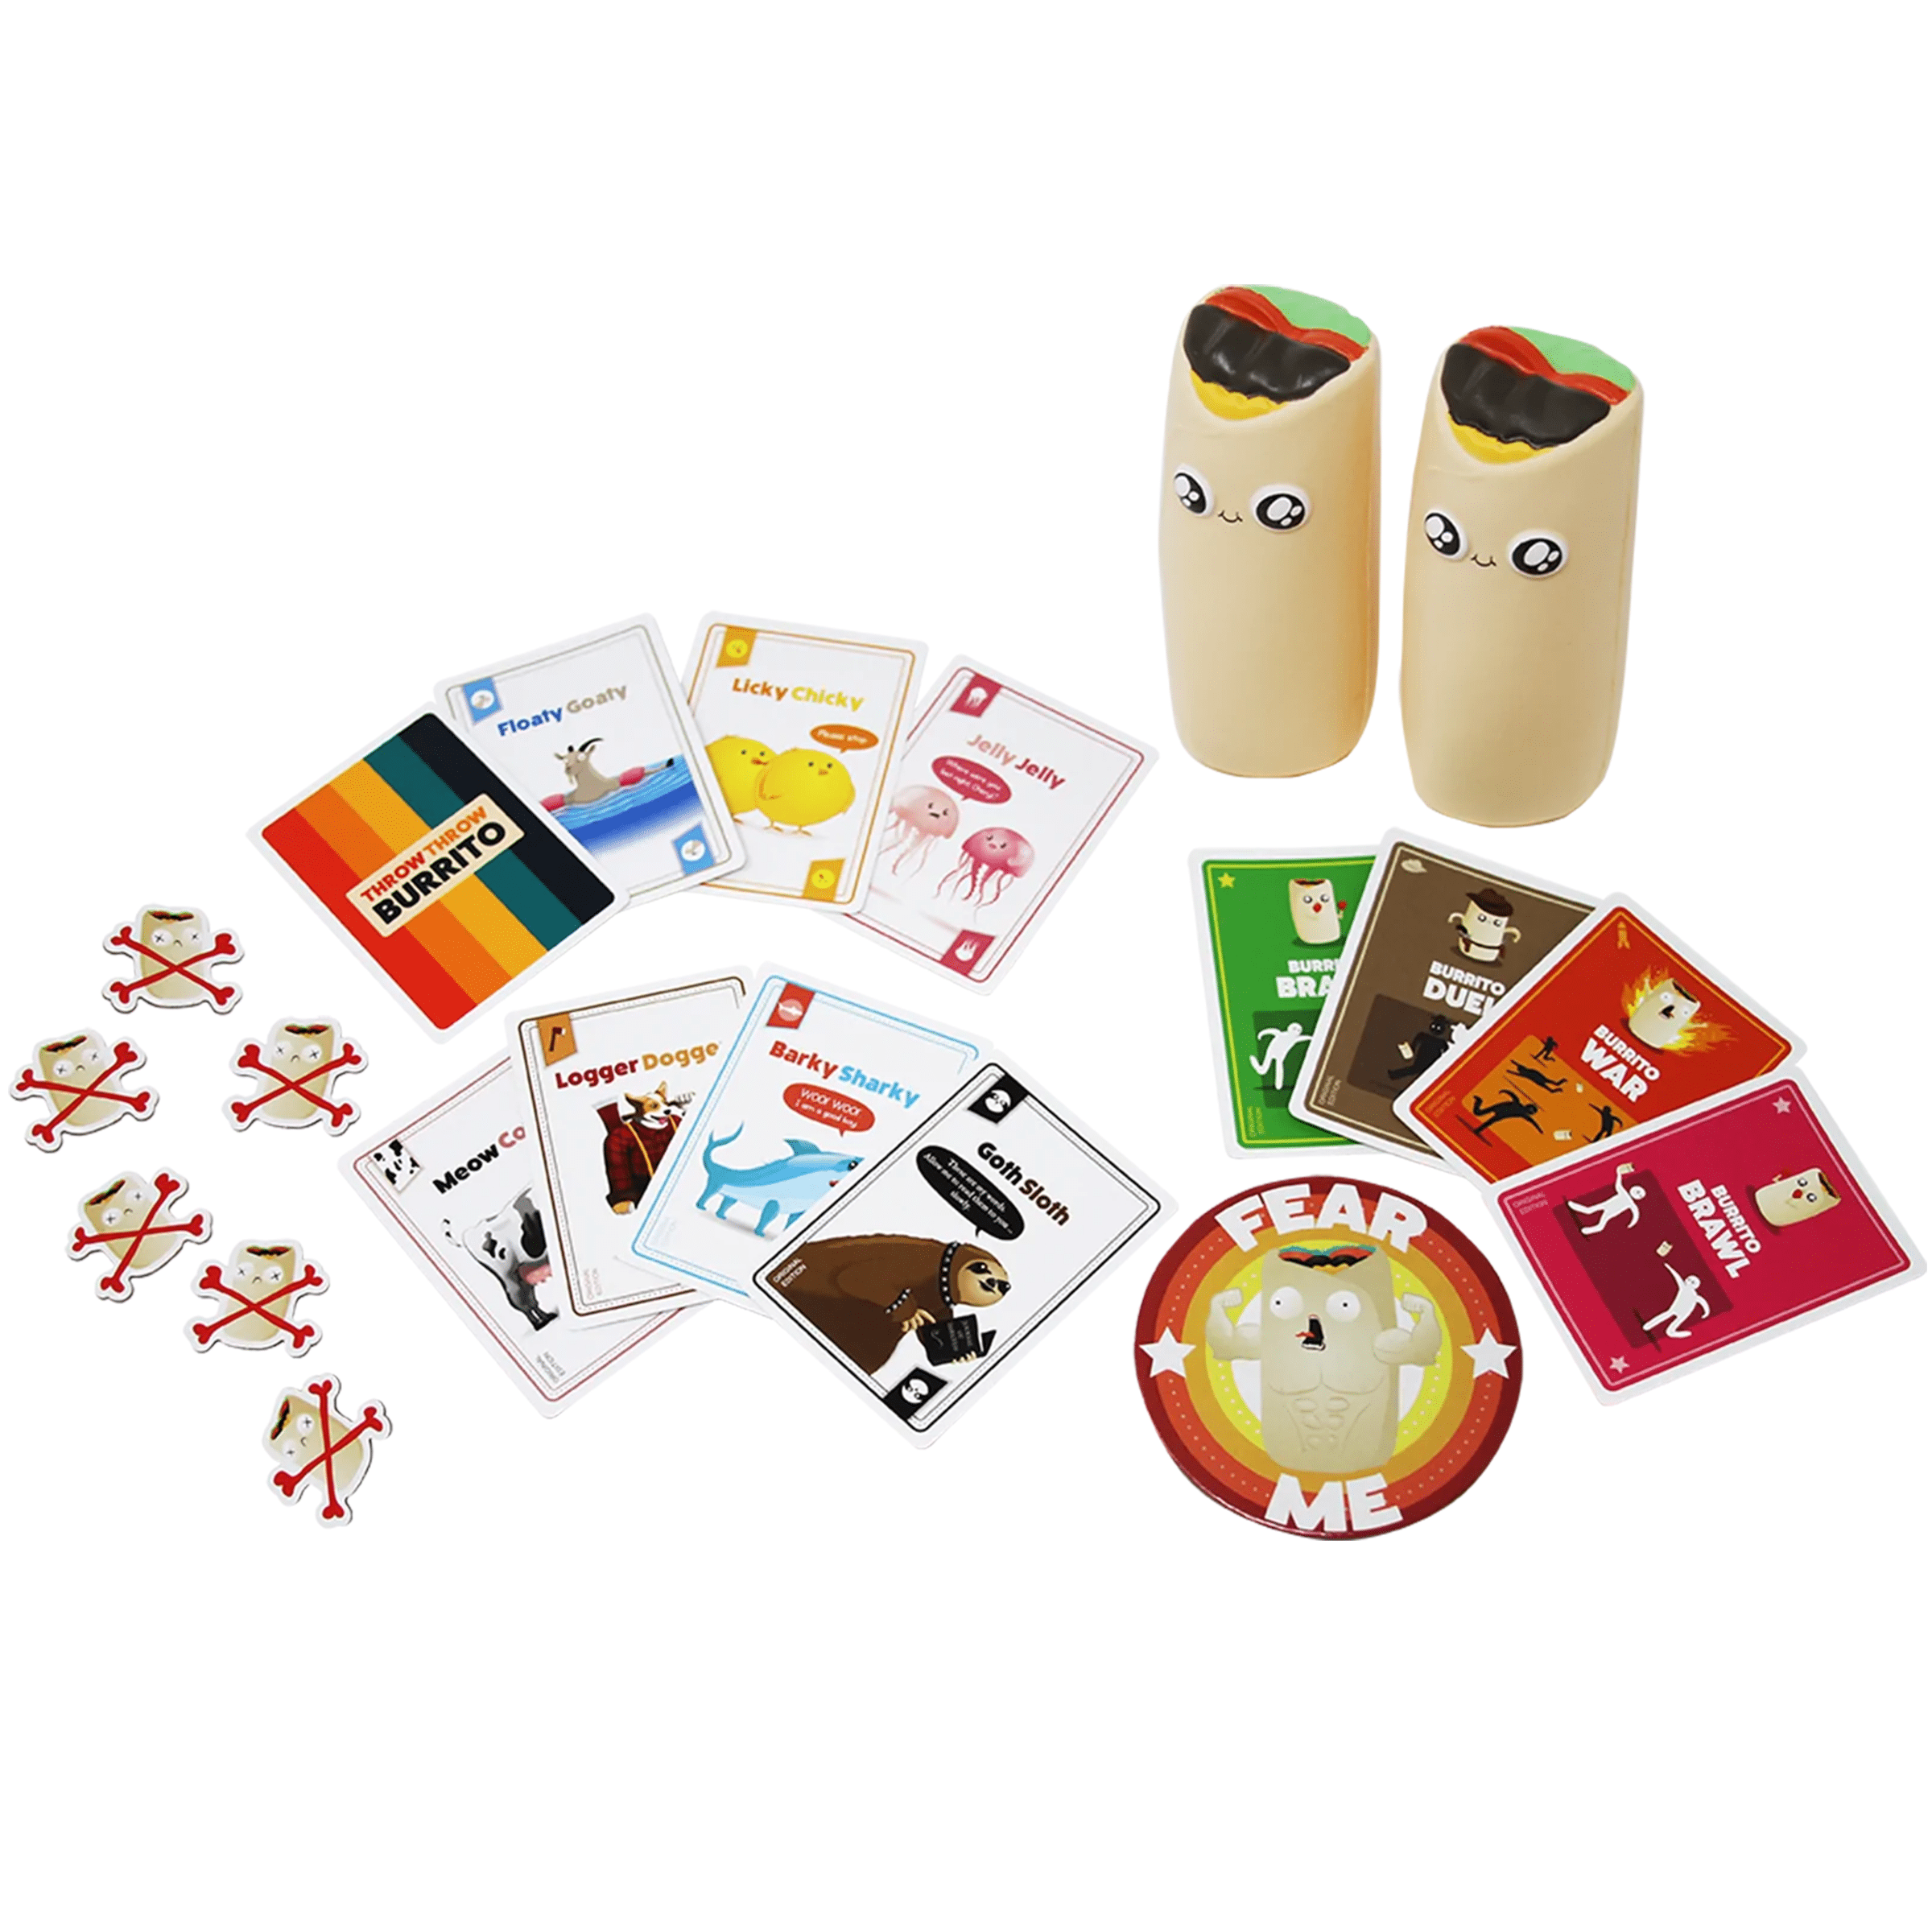 Throw Throw Burrito by Exploding Kittens a Dodgeball Party Game, Ages 7 and  up, 2-6 Players